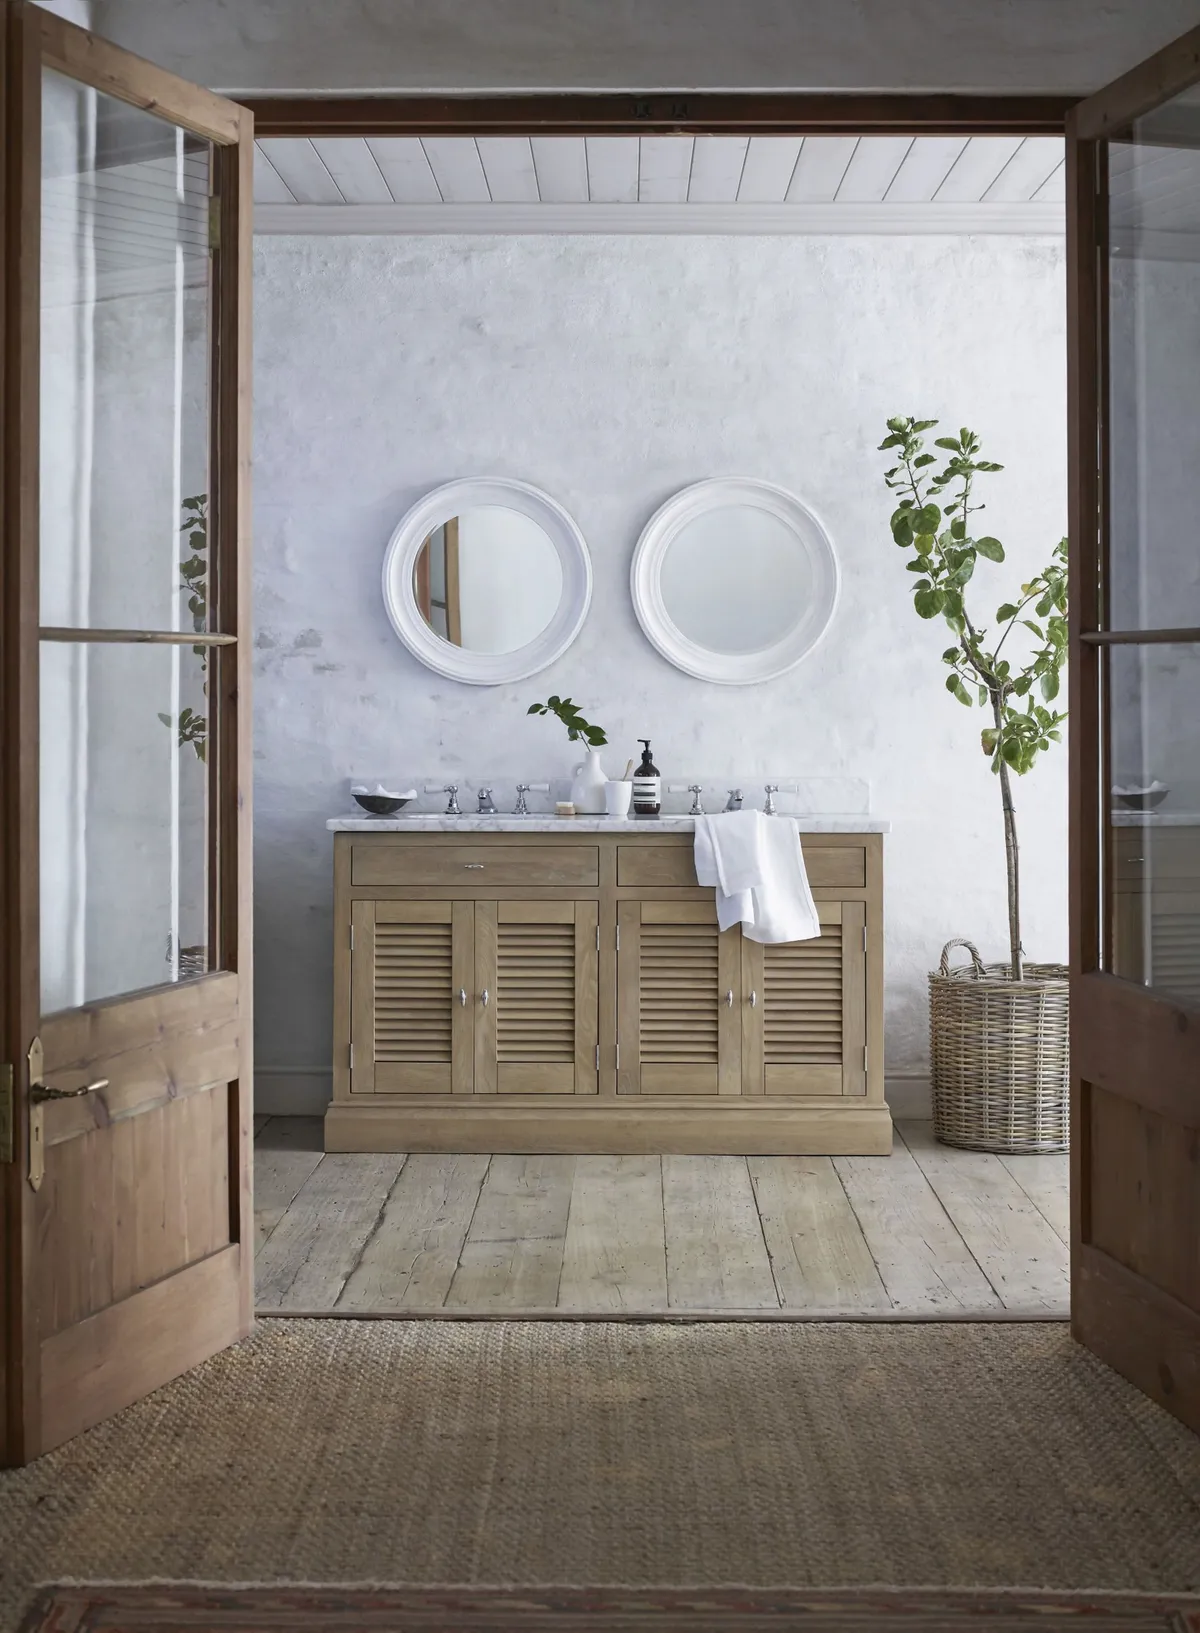 A wooden dresser used as a stand for sinks in a large bathroom